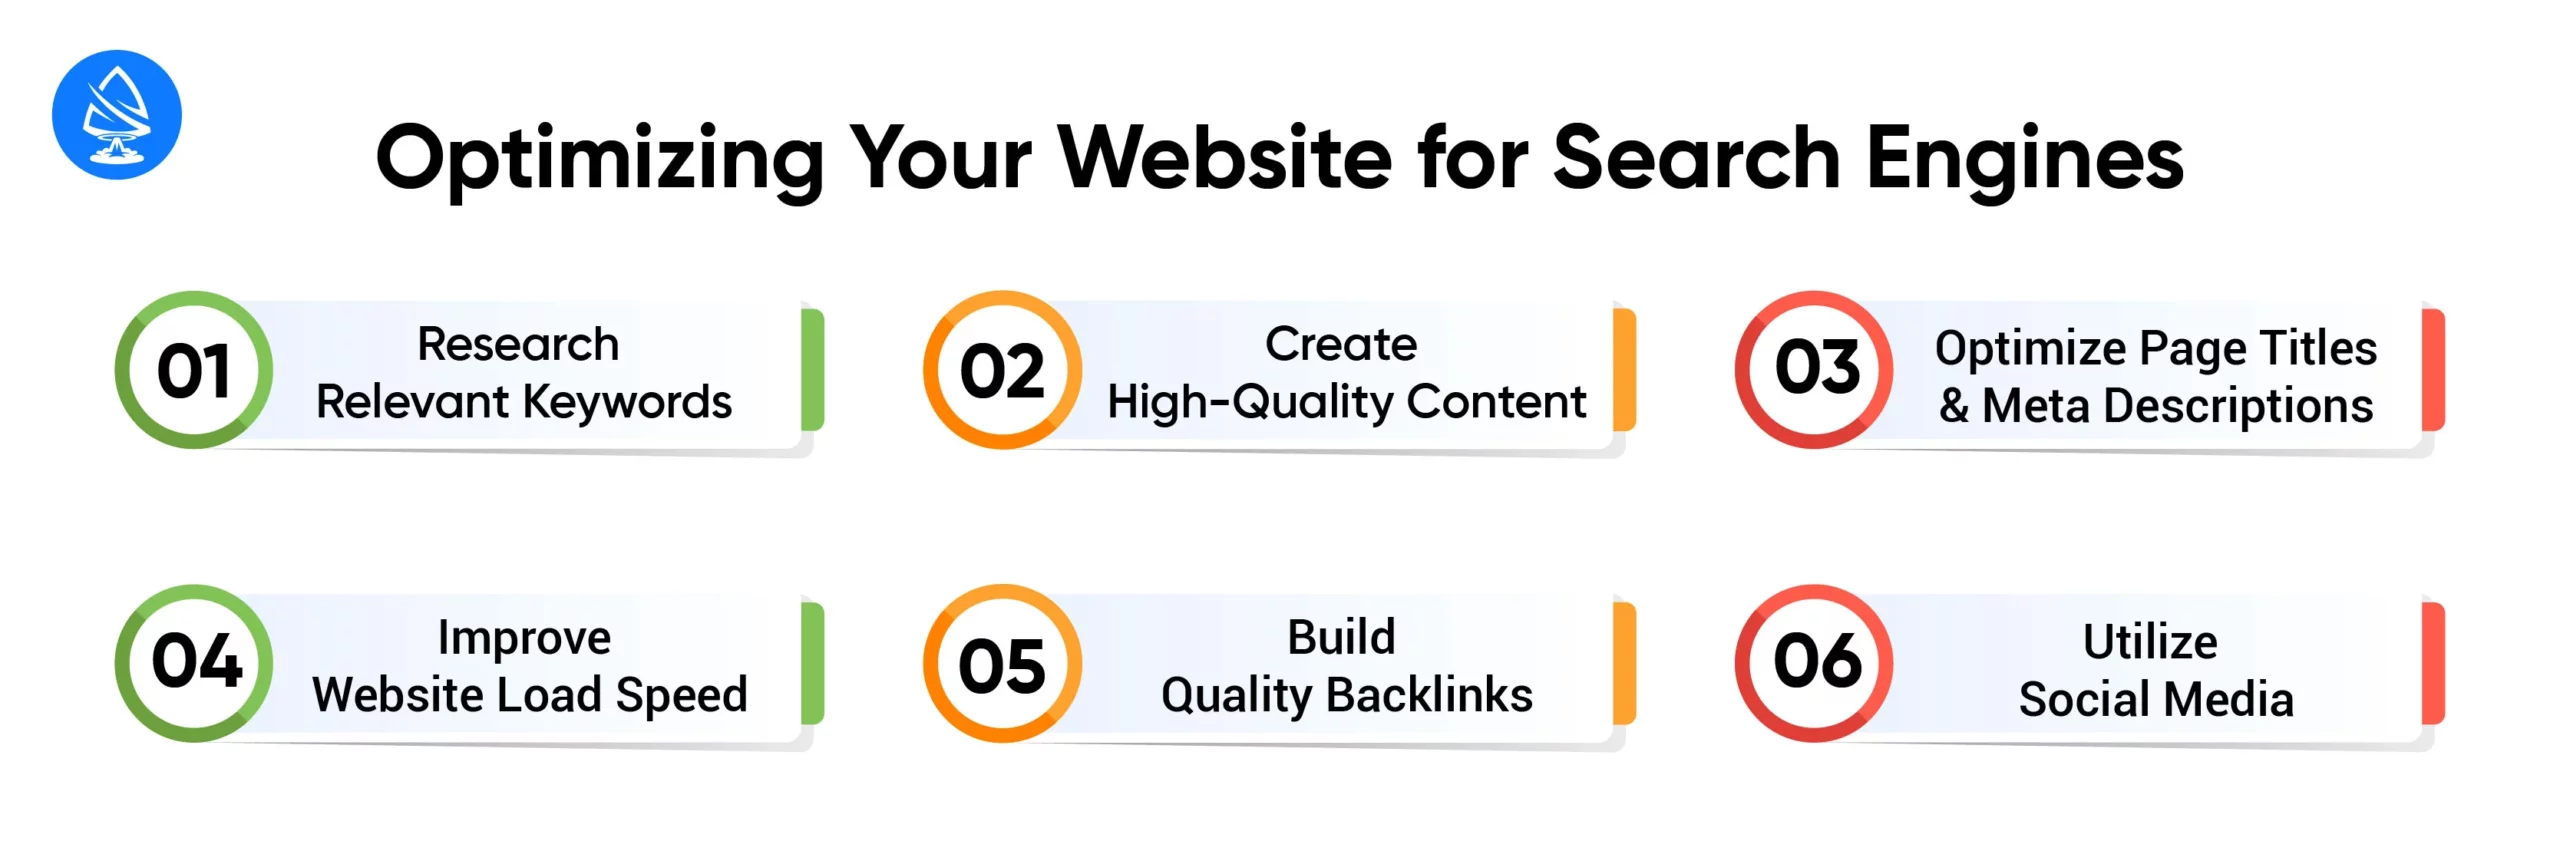 Optimizing Your Website for Search Engines 